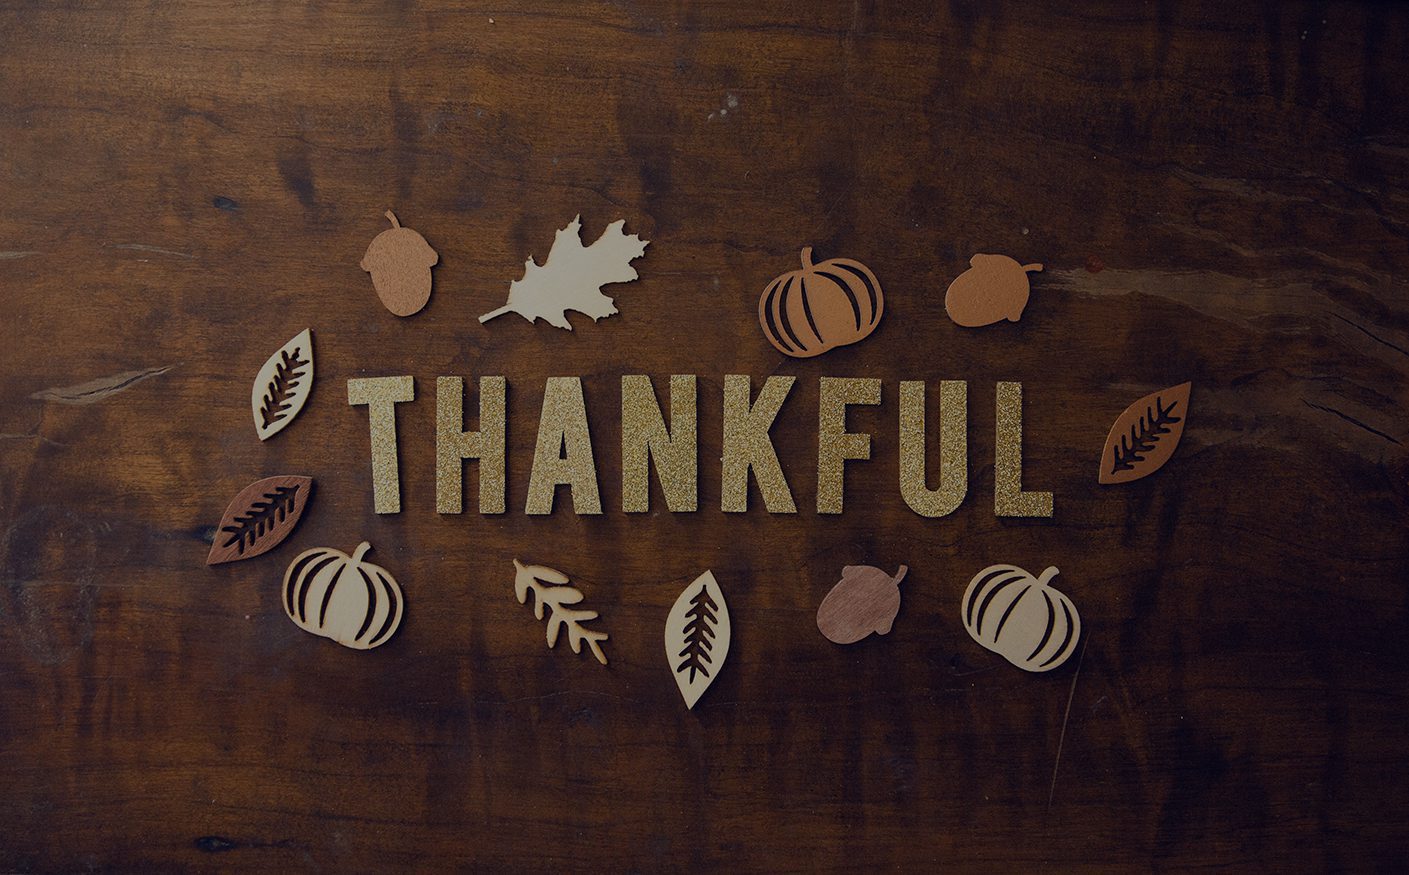 Thankful written out in cutout gold letters with images of autumn scattered around (leaves, acorns, and pumpkins)